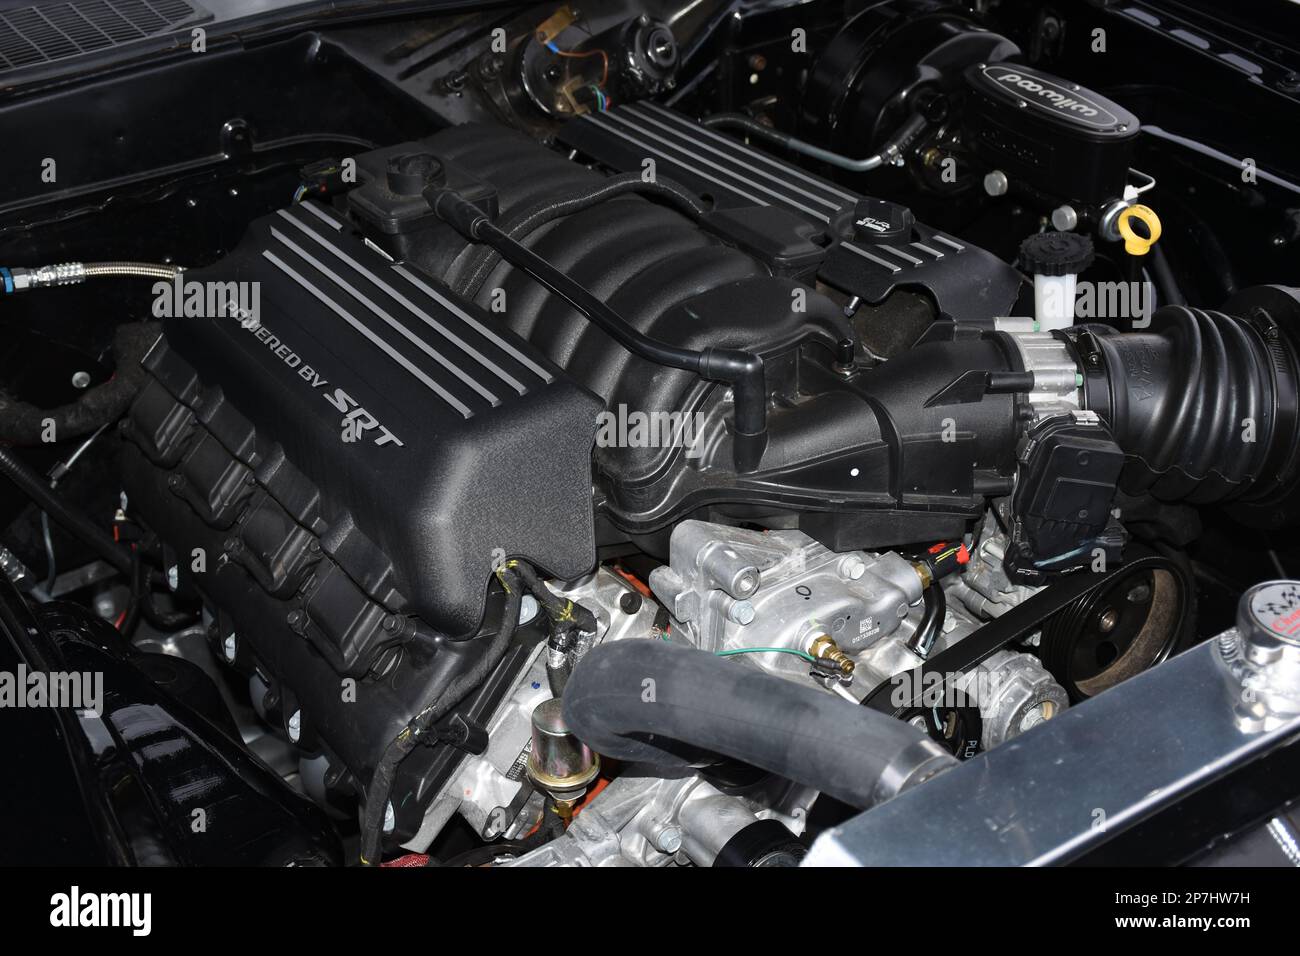 An SRT Engine in a show car at a car show. Stock Photo